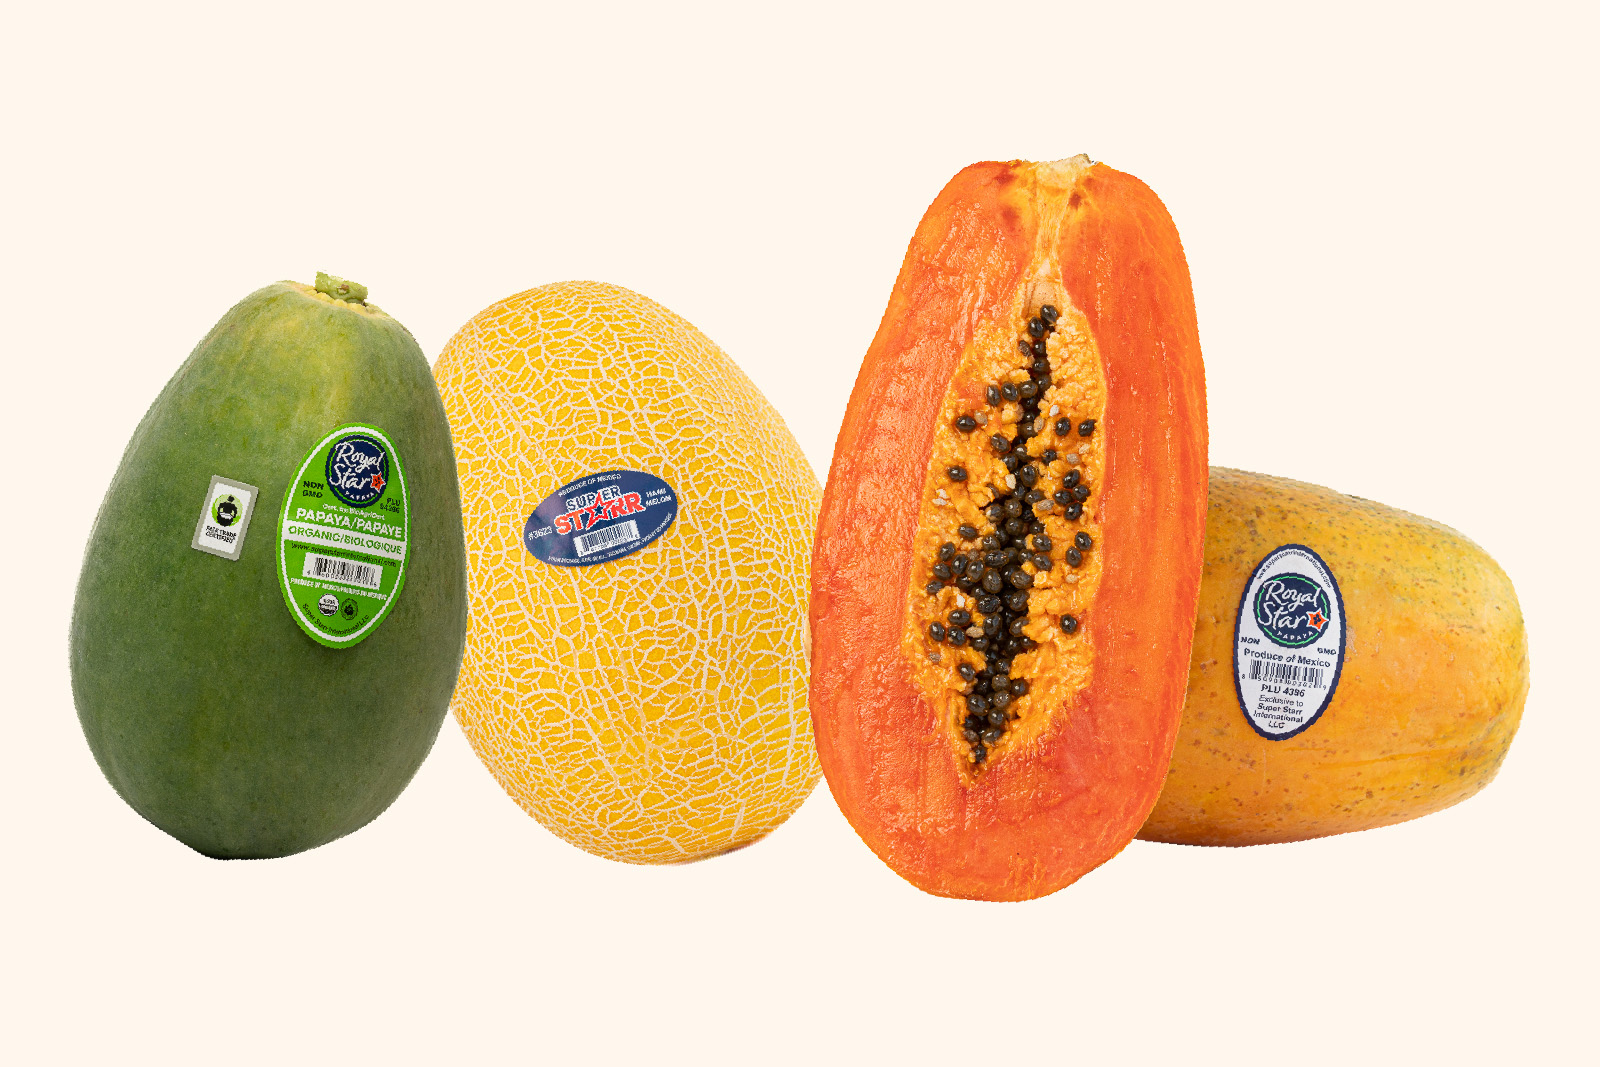 Images of super star and royal star papayas and honeydews with PLU stickers